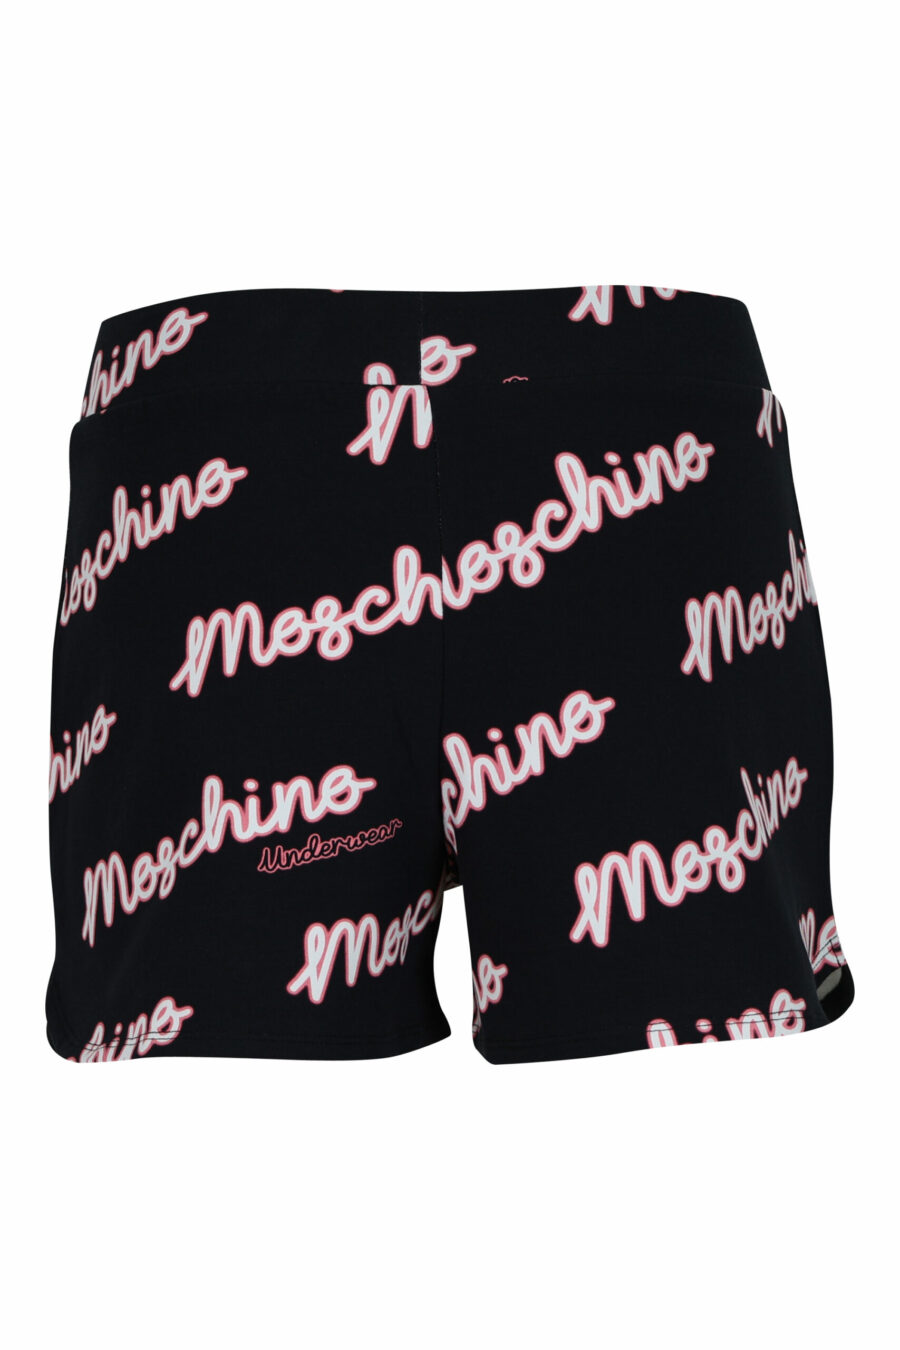 Black shorts with "all over logo moschino" fuchsia - 667113355603 1 scaled